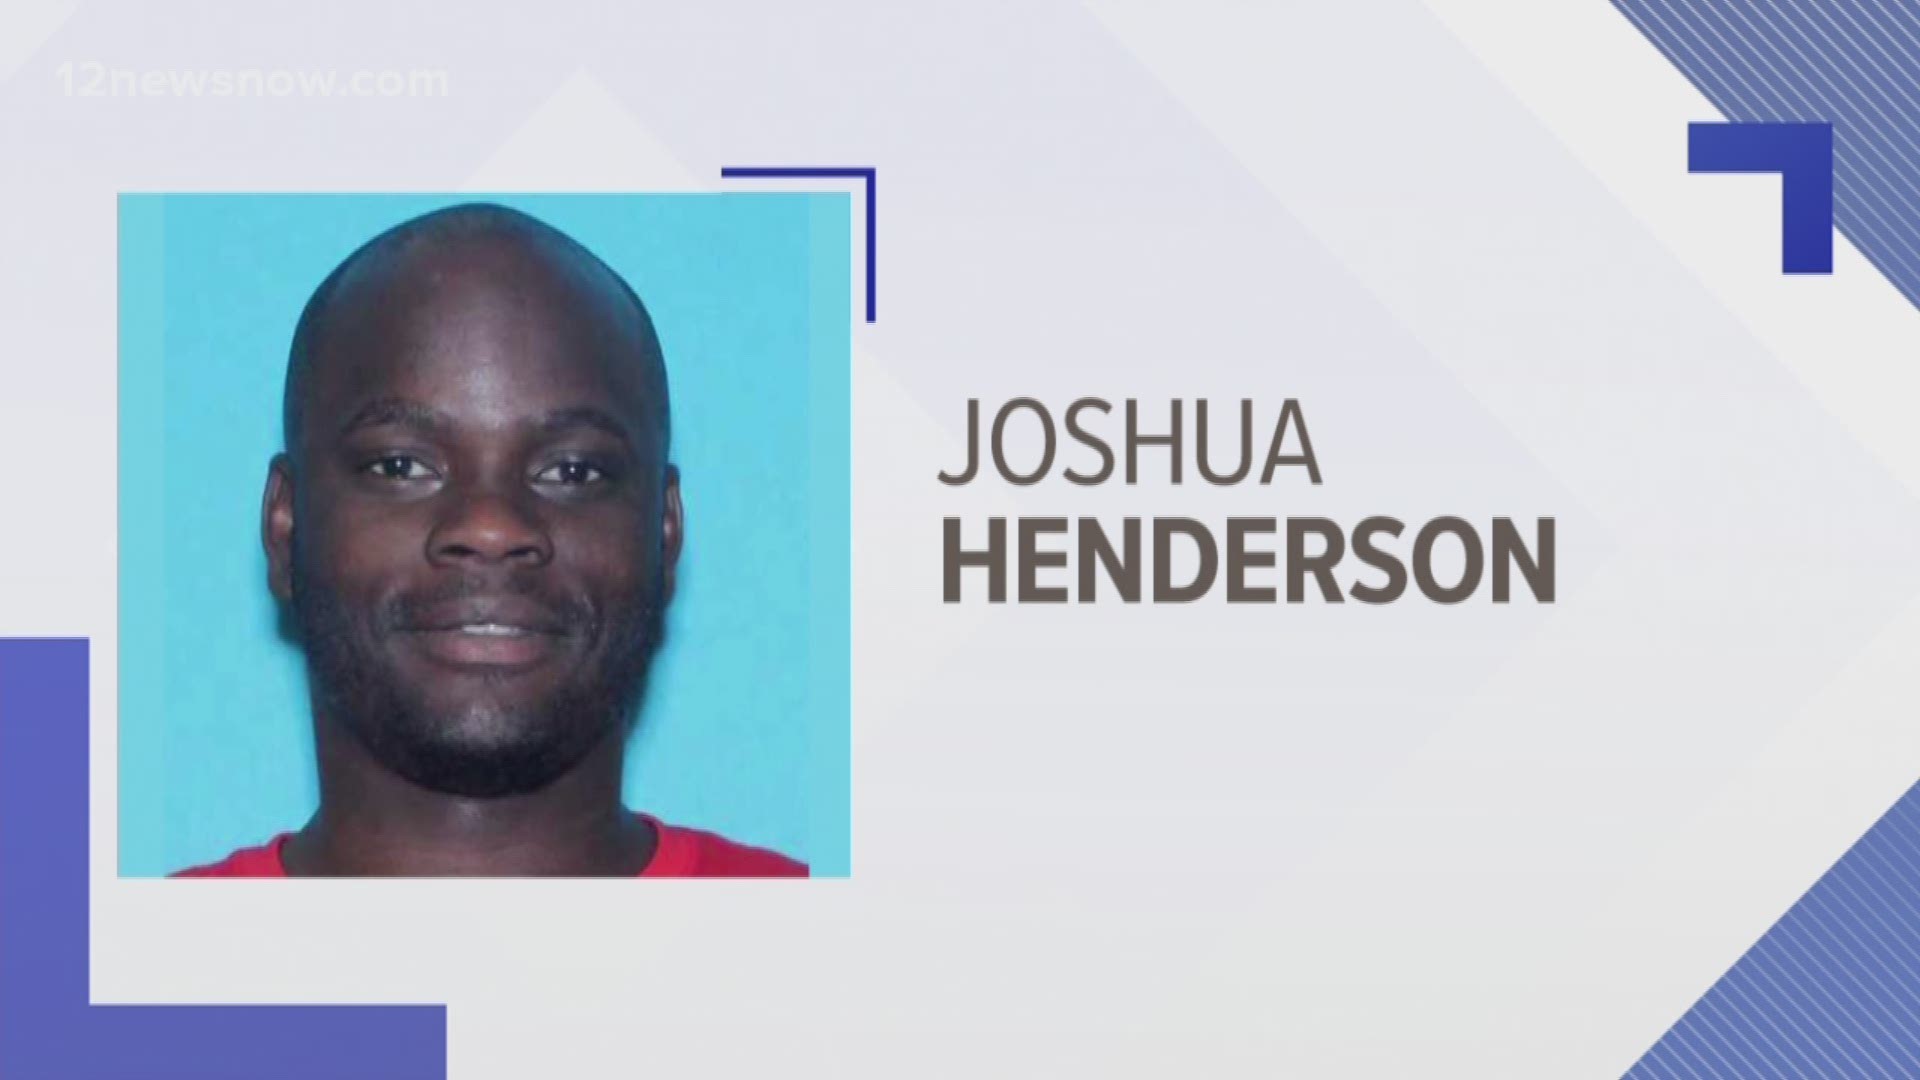 Man is wanted in connection with July homicide